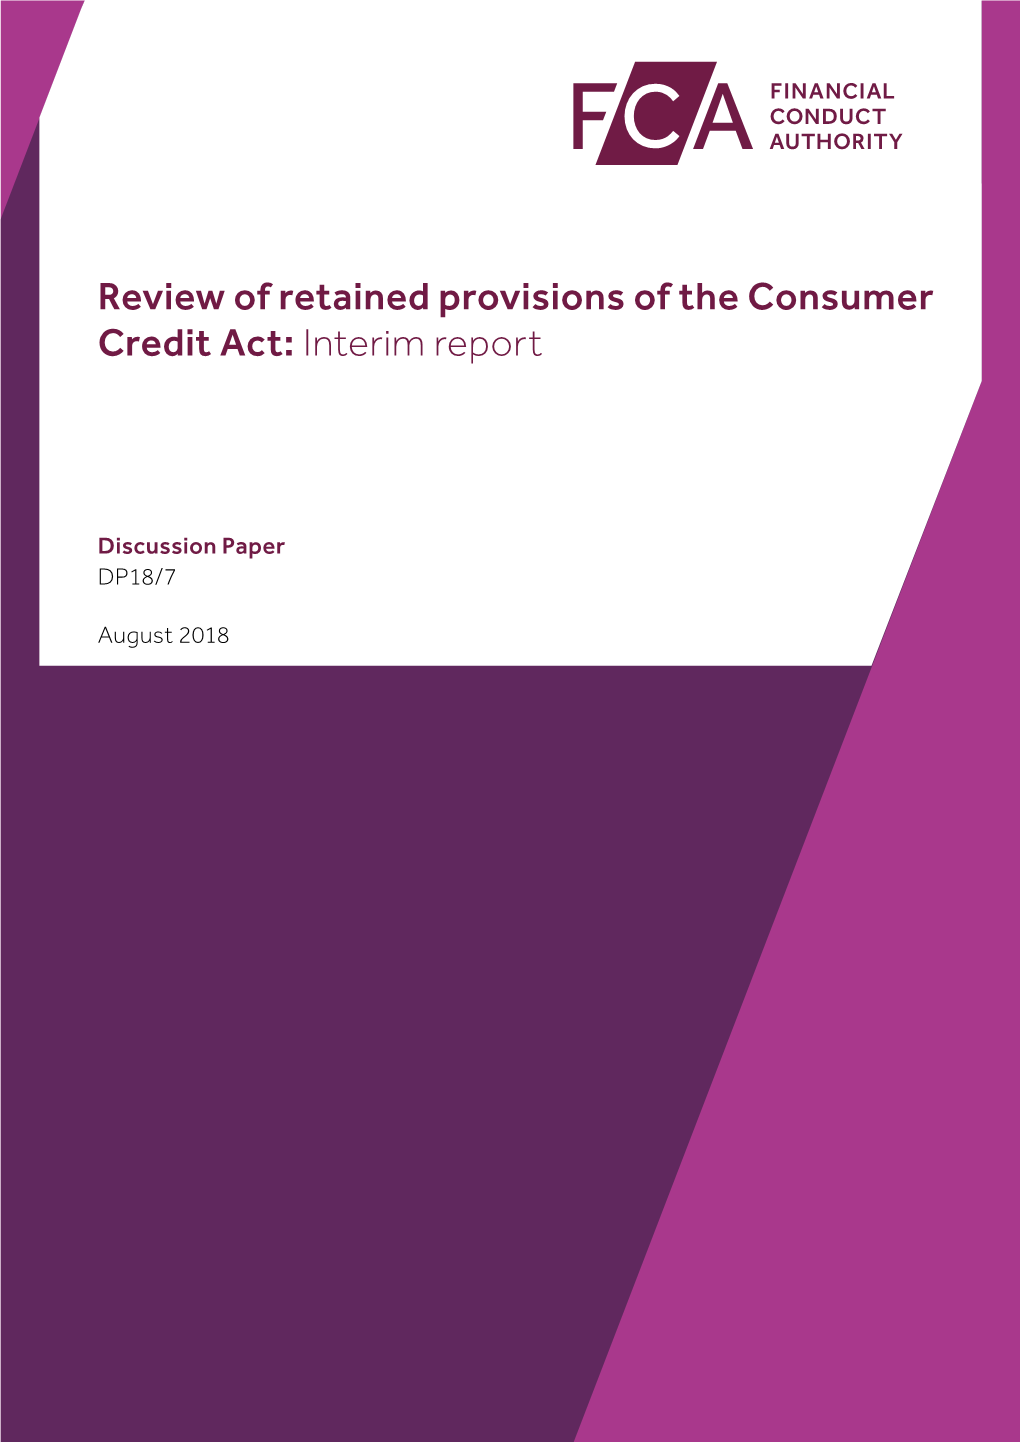 DP18/7: Review of Retained Provisions of the Consumer Credit Act: Interim Report